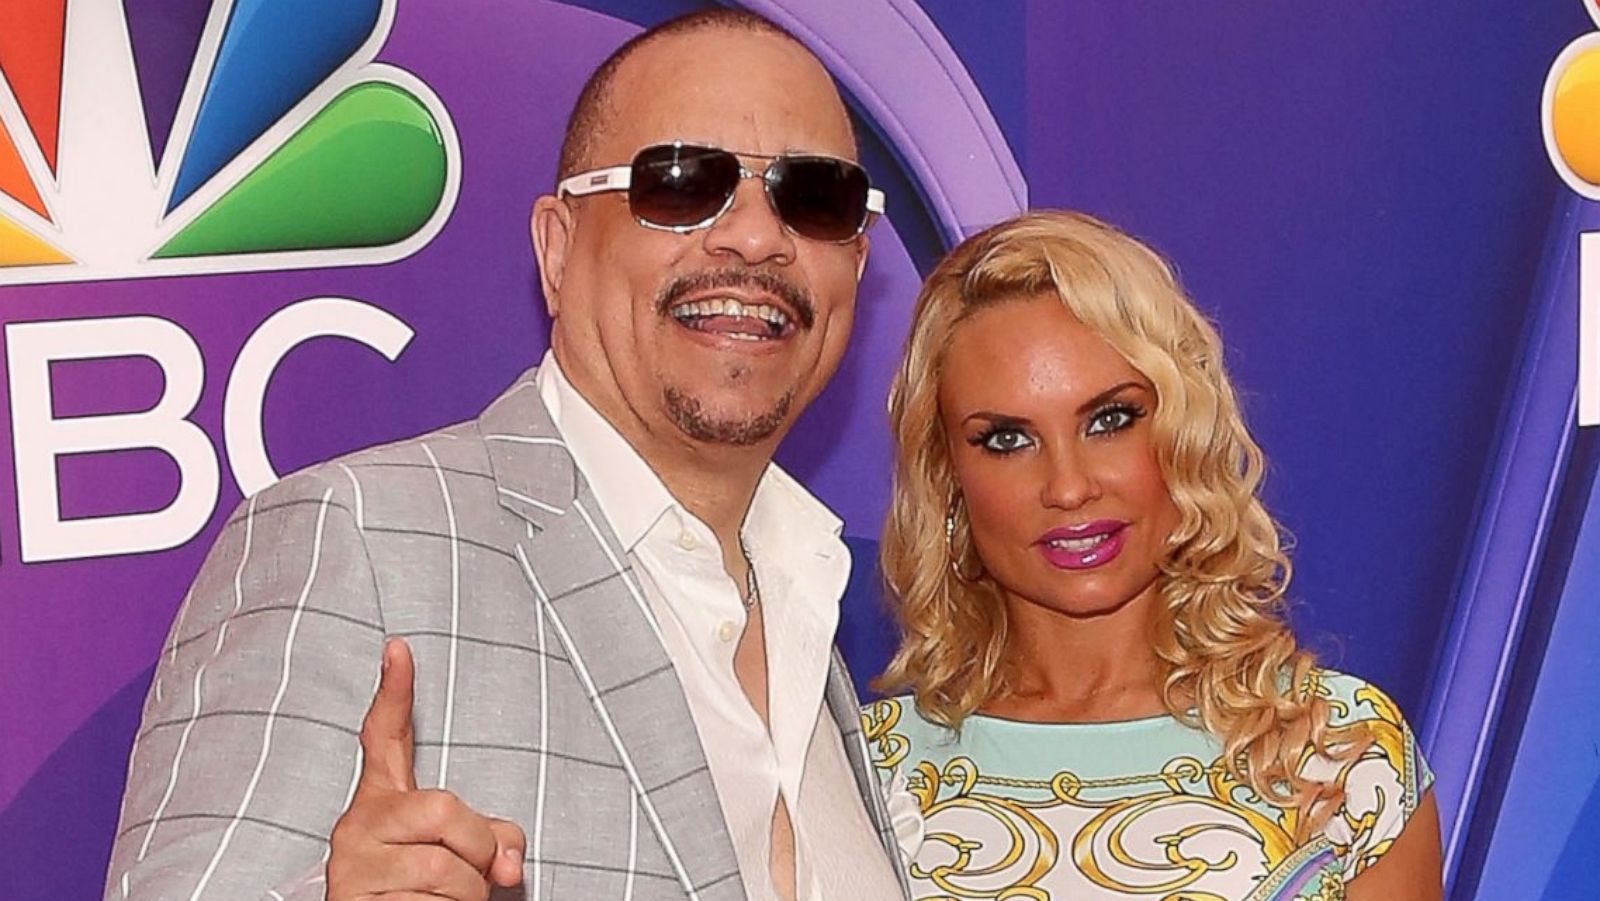 Rapper Ice T and Wife Coco Expecting First Child Together